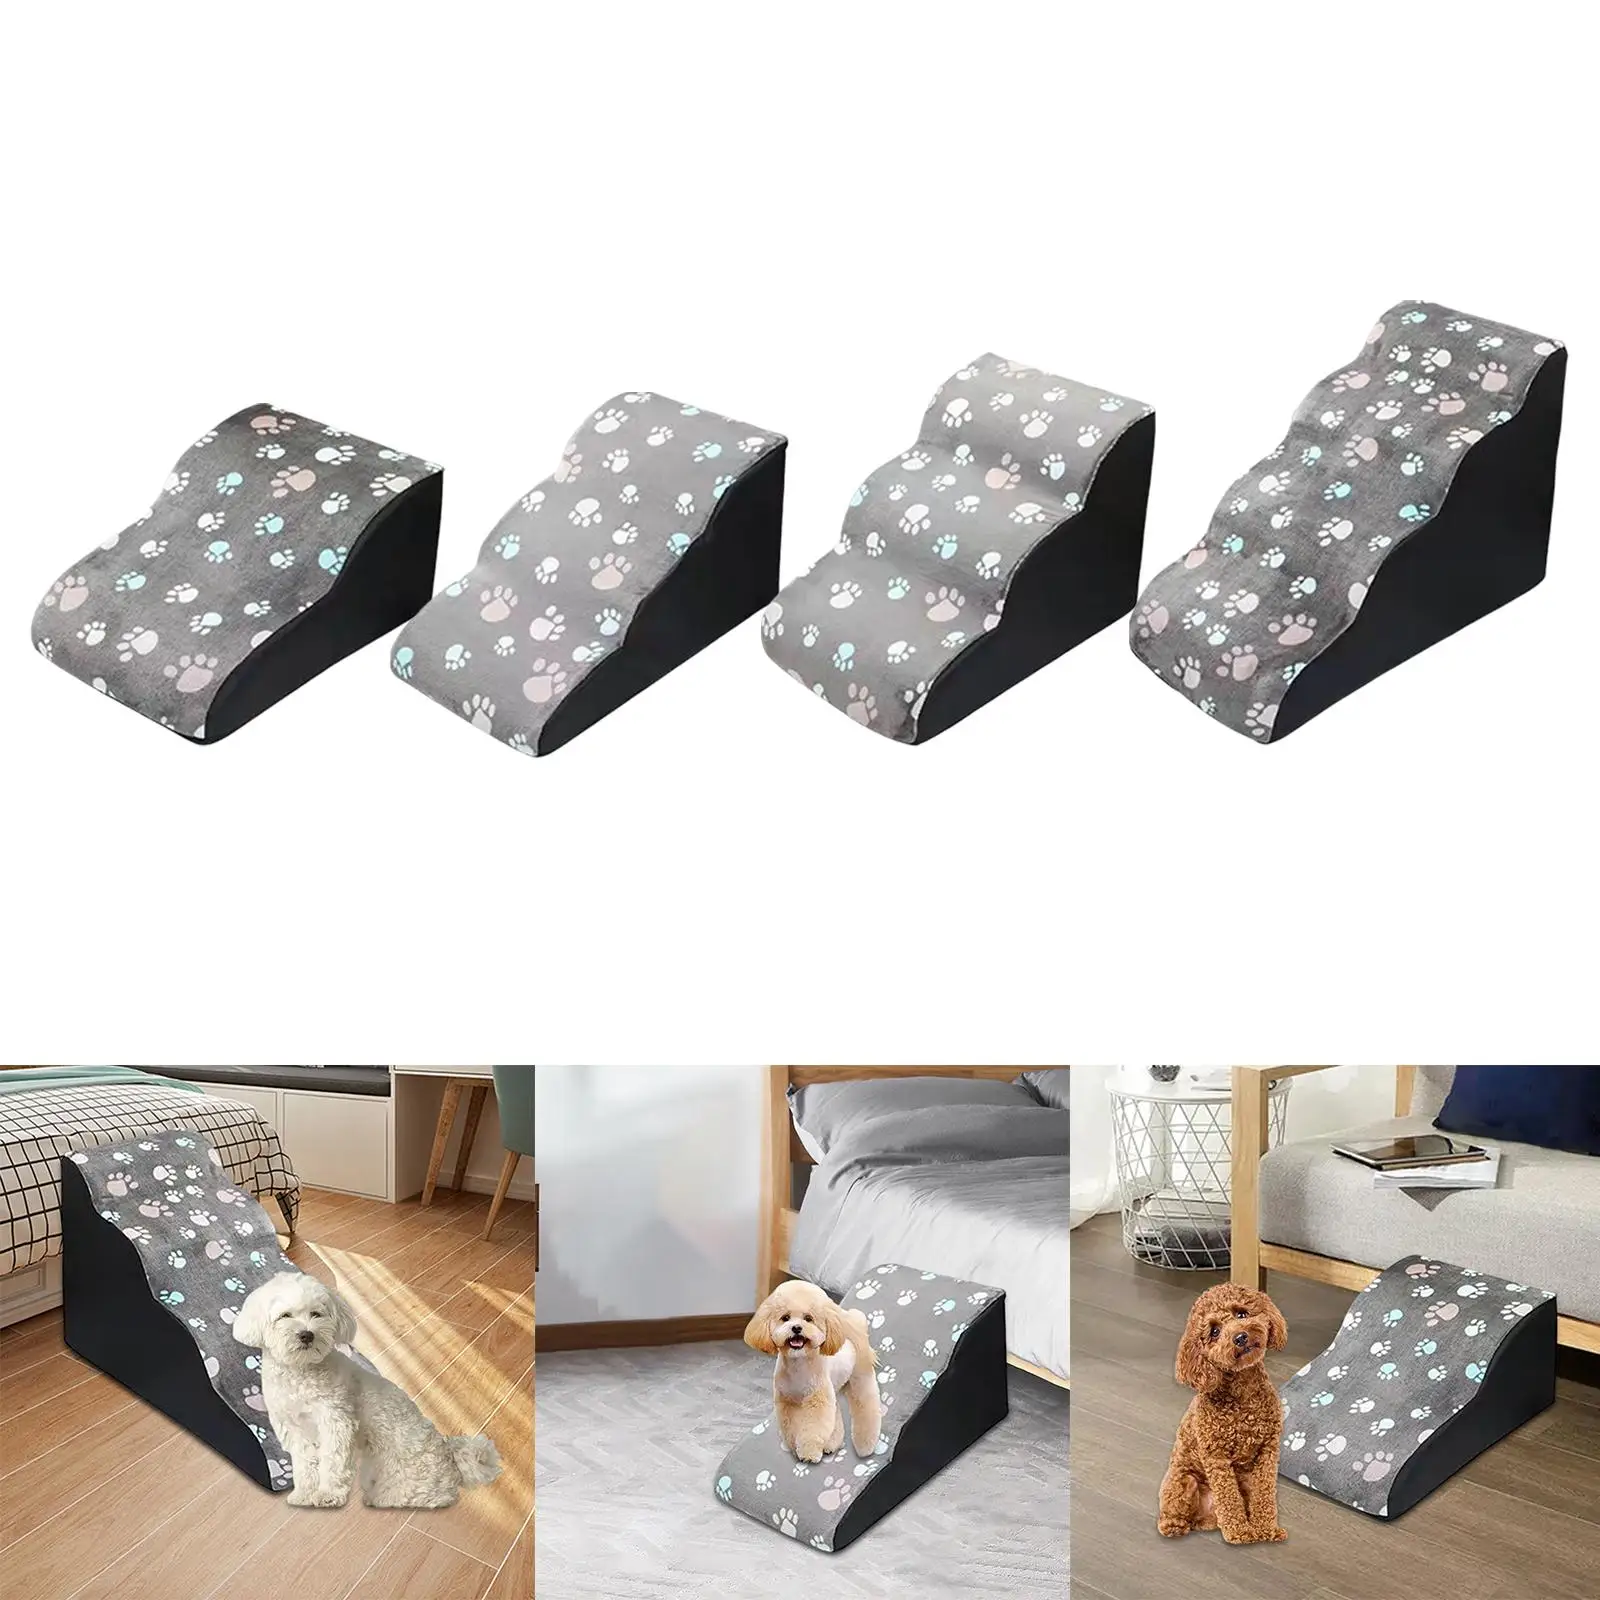 Soft Dog Stairs with Removable Cover Pet Ramp Ladder Slope Wide Pet Supplies for Kittens High Bed Climbing Small Dogs Puppy Cats